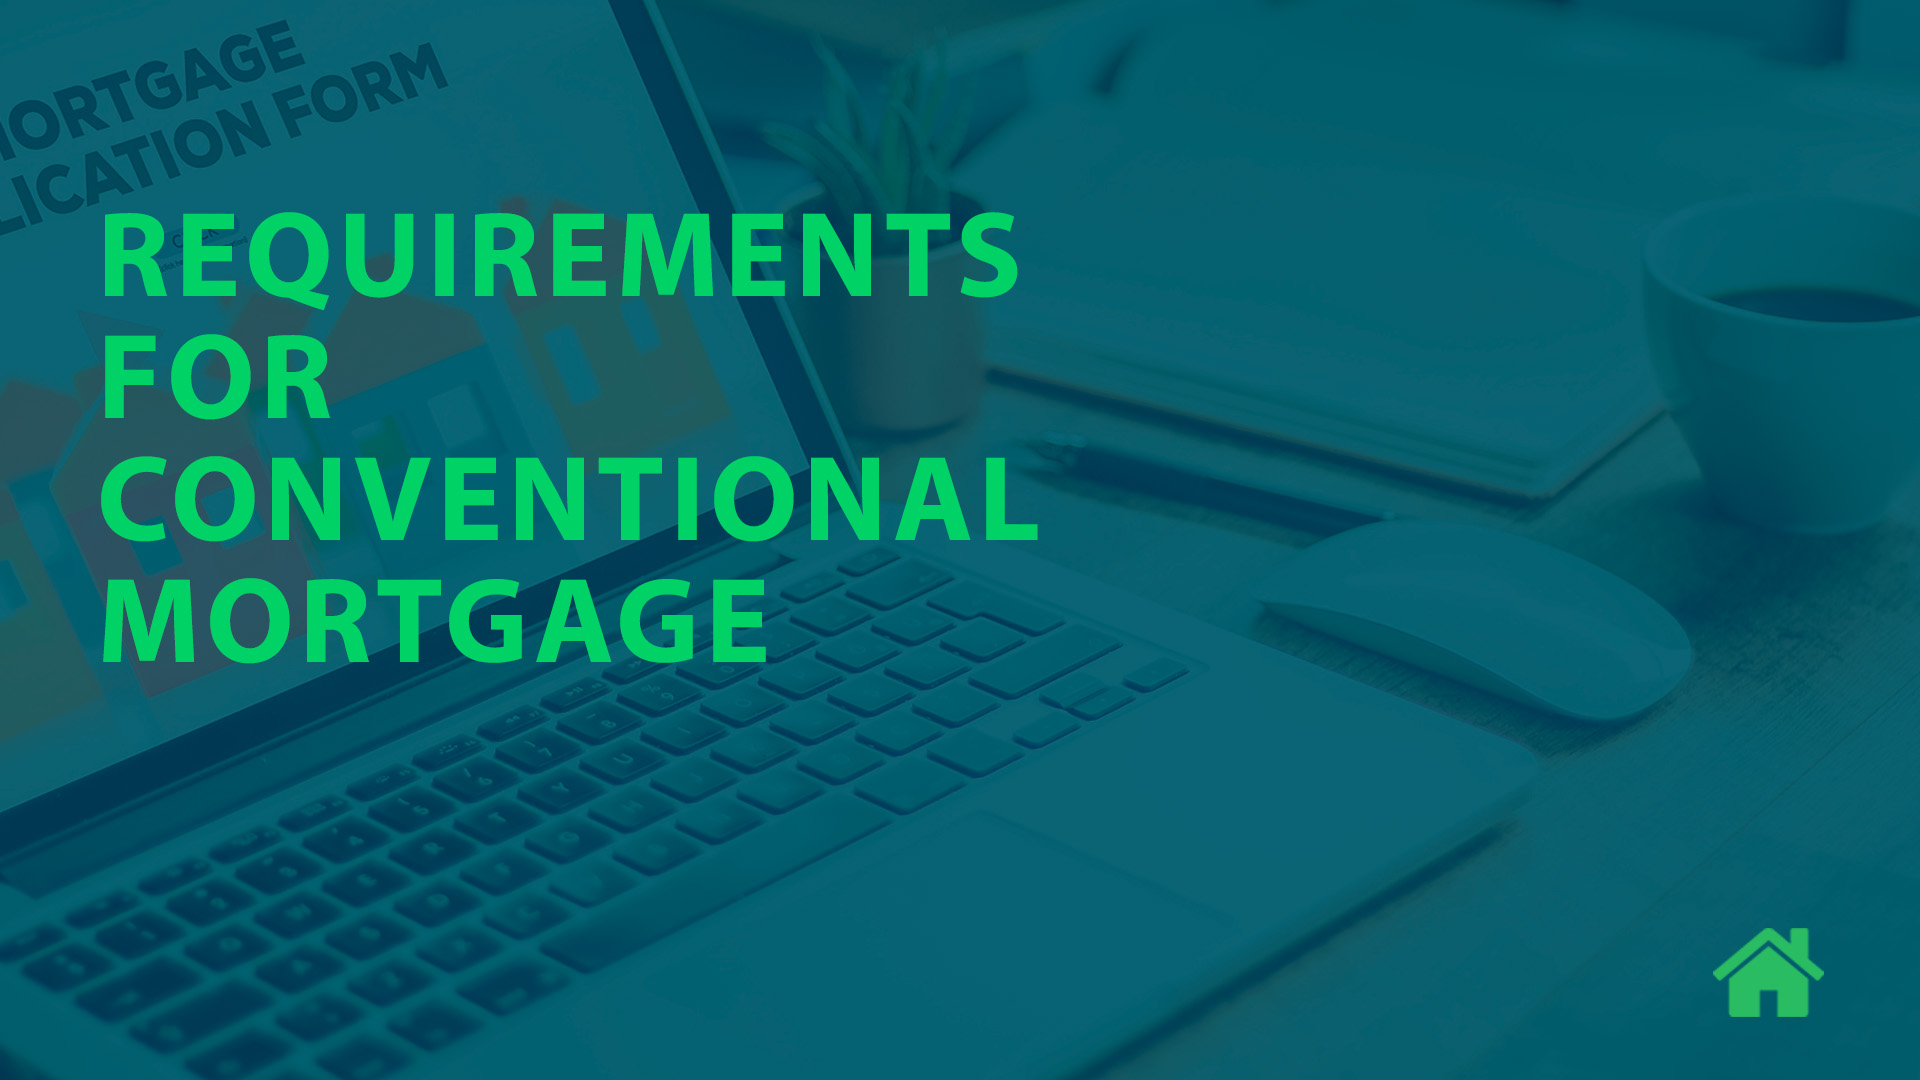 Requirements for conventional mortgage